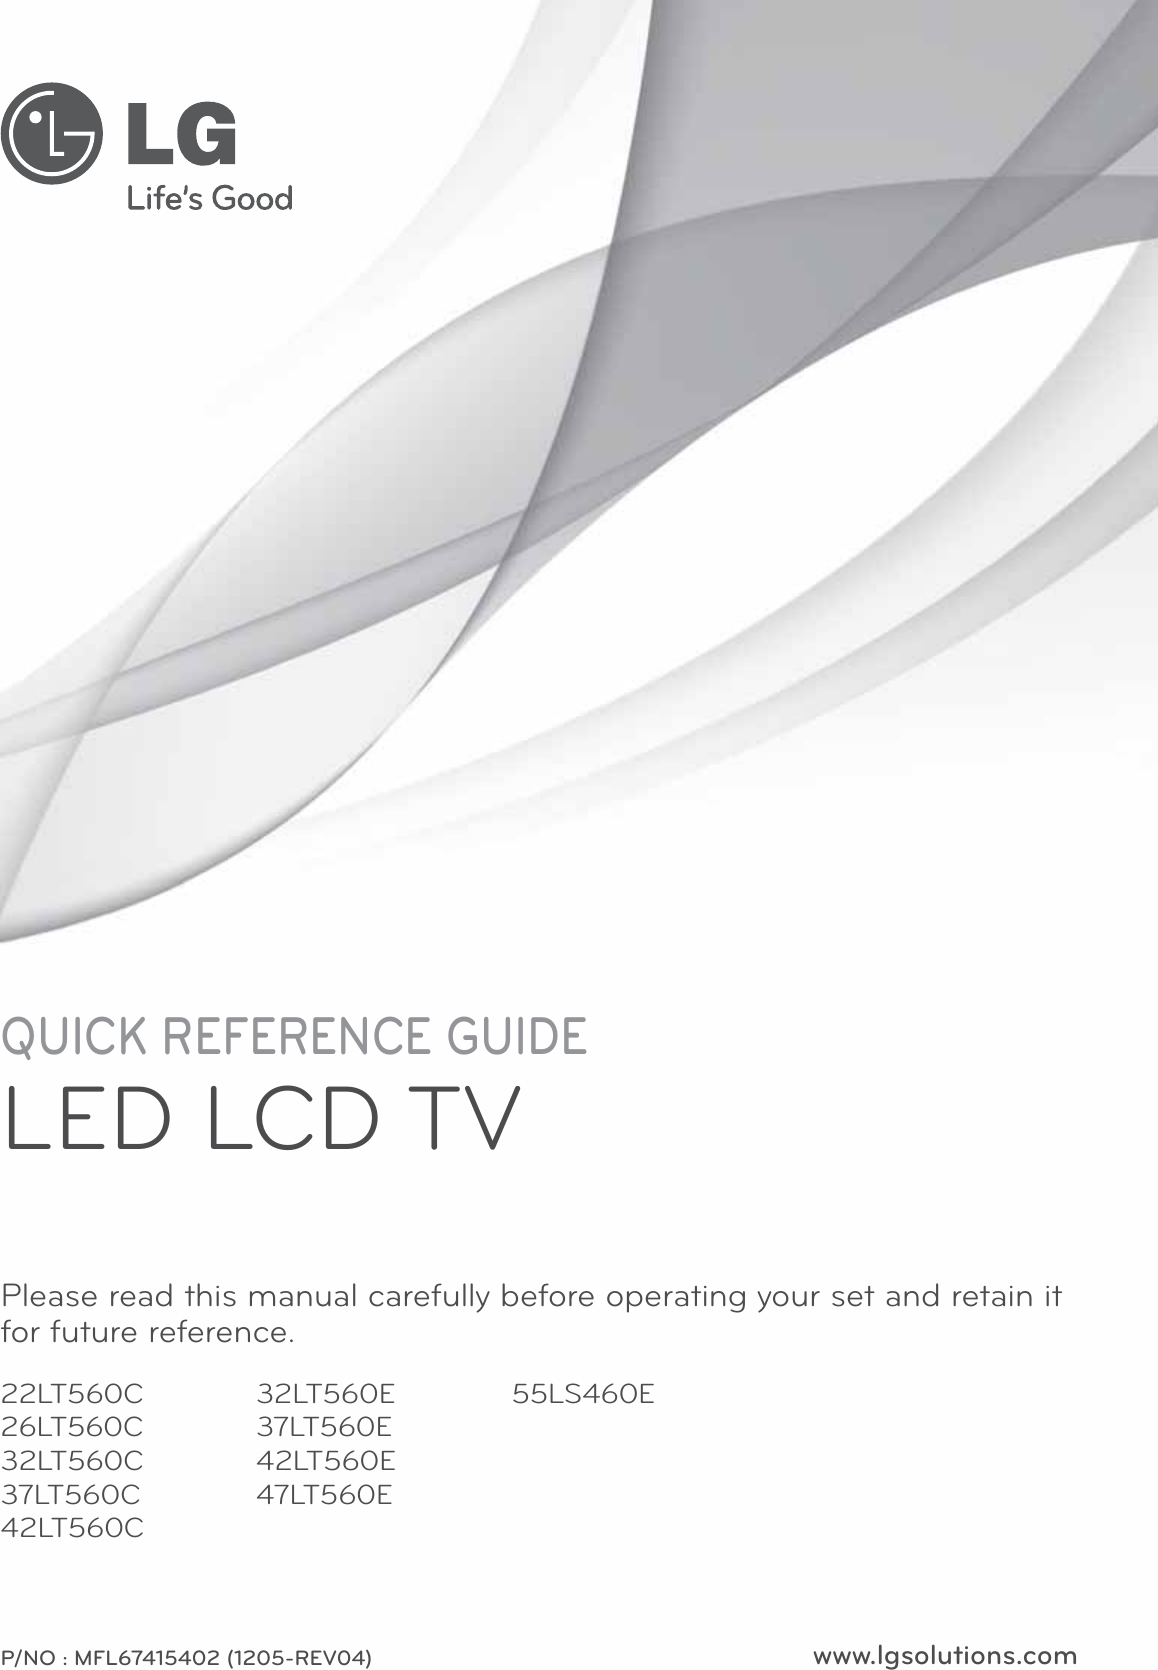 www.lgsolutions.comQUICK REFERENCE GUIDELED LCD TVPlease read this manual carefully before operating your set and retain it for future reference.P/NO : MFL67415402 (1205-REV04)22LT560C26LT560C32LT560C37LT560C42LT560C32LT560E37LT560E42LT560E47LT560E55LS460E